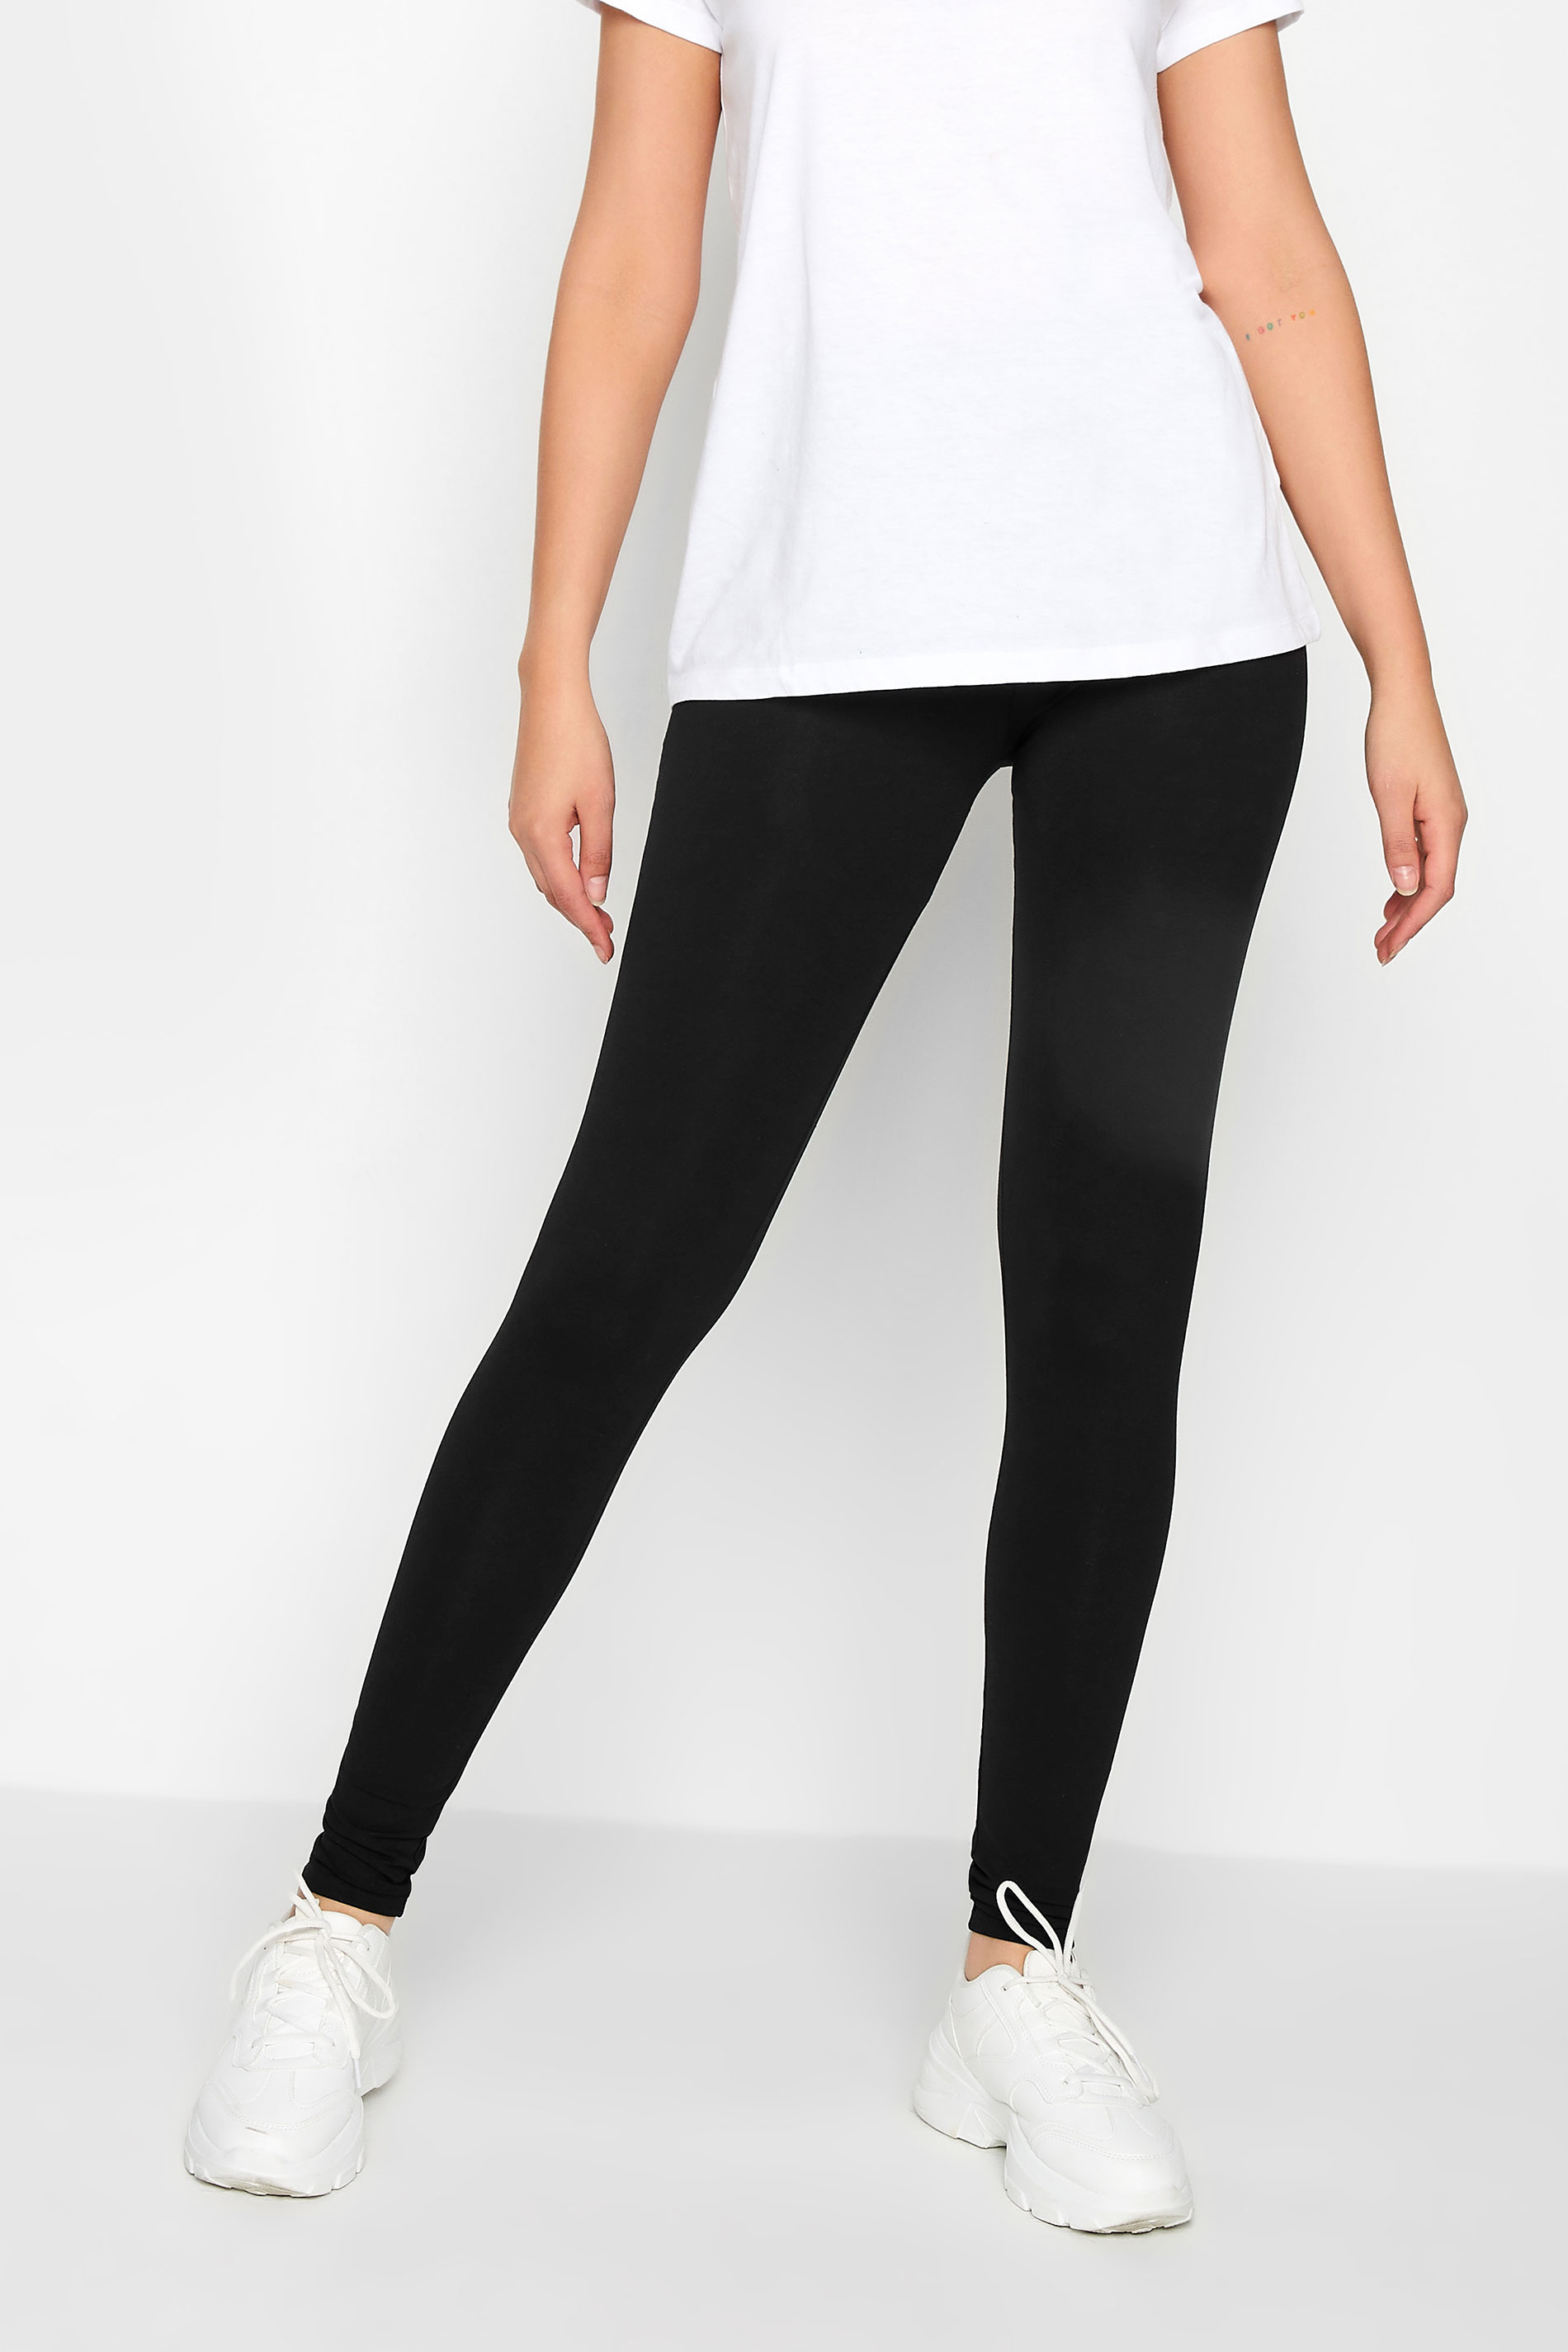 LTS MADE FOR GOOD 2 PACK Black Cotton Leggings | Long Tall Sally  2